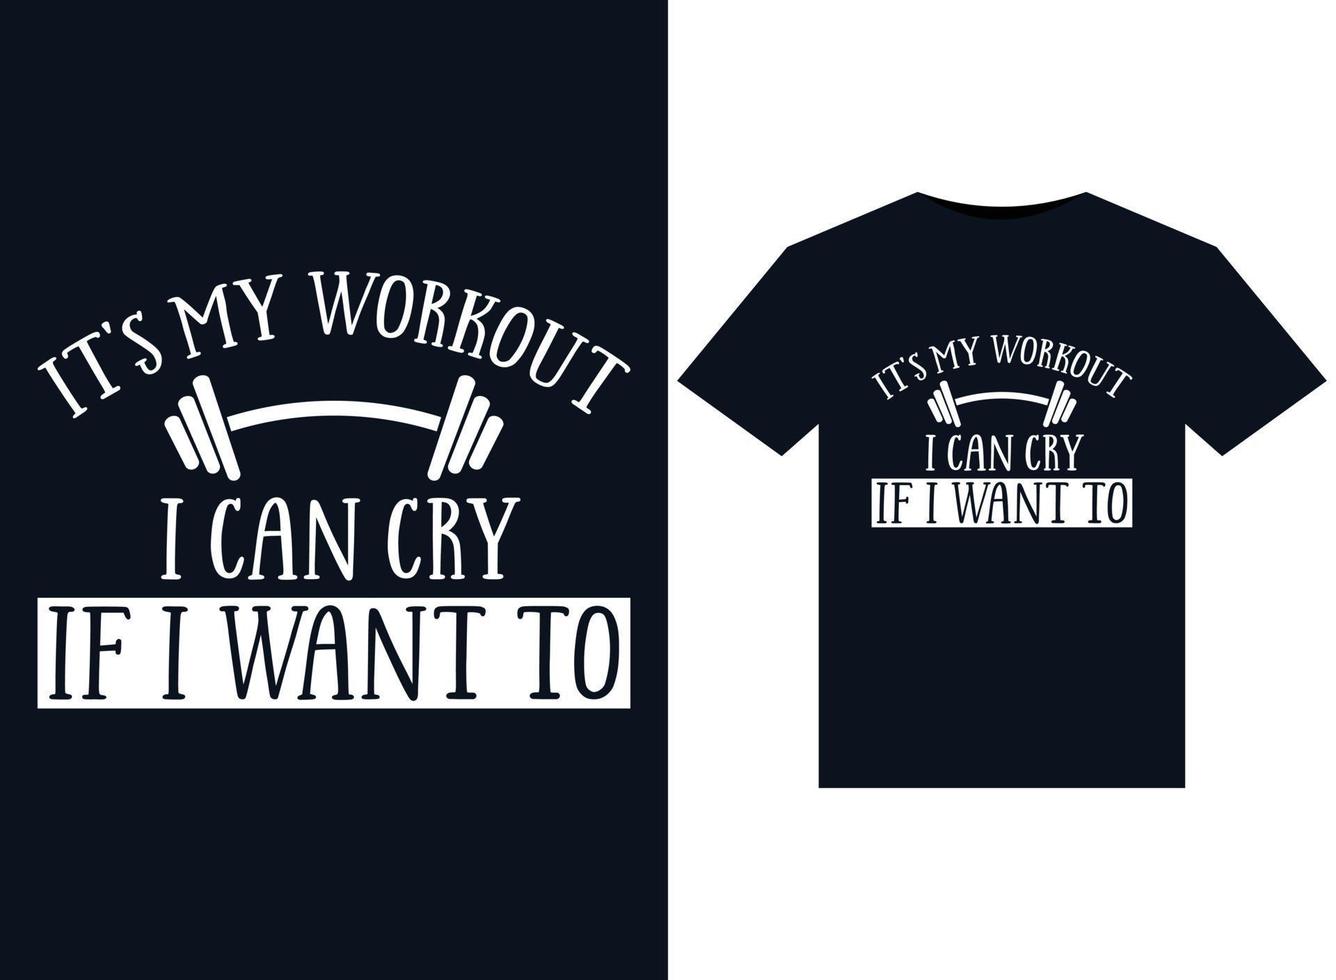 It's My Workout I Can Cry If I Want To illustrations for print-ready T-Shirts design vector